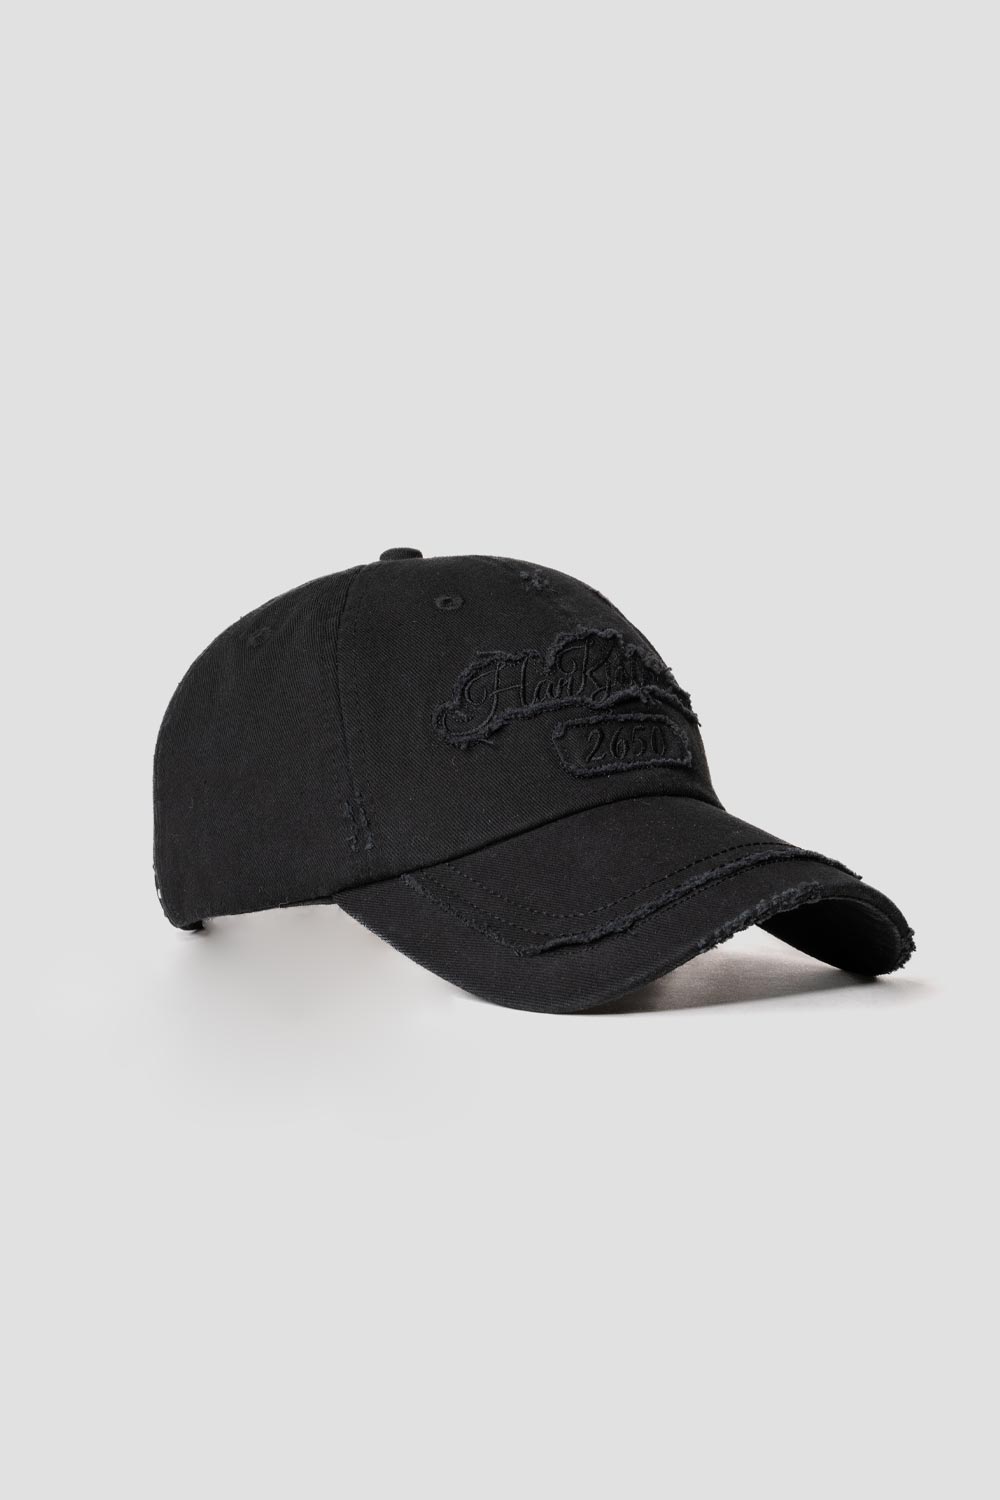 Buy the Han Kjobenhavn Distressed 2650 Ripped Cap in Black at Intro. Spend £50 for free UK delivery. Official stockists. We ship worldwide.